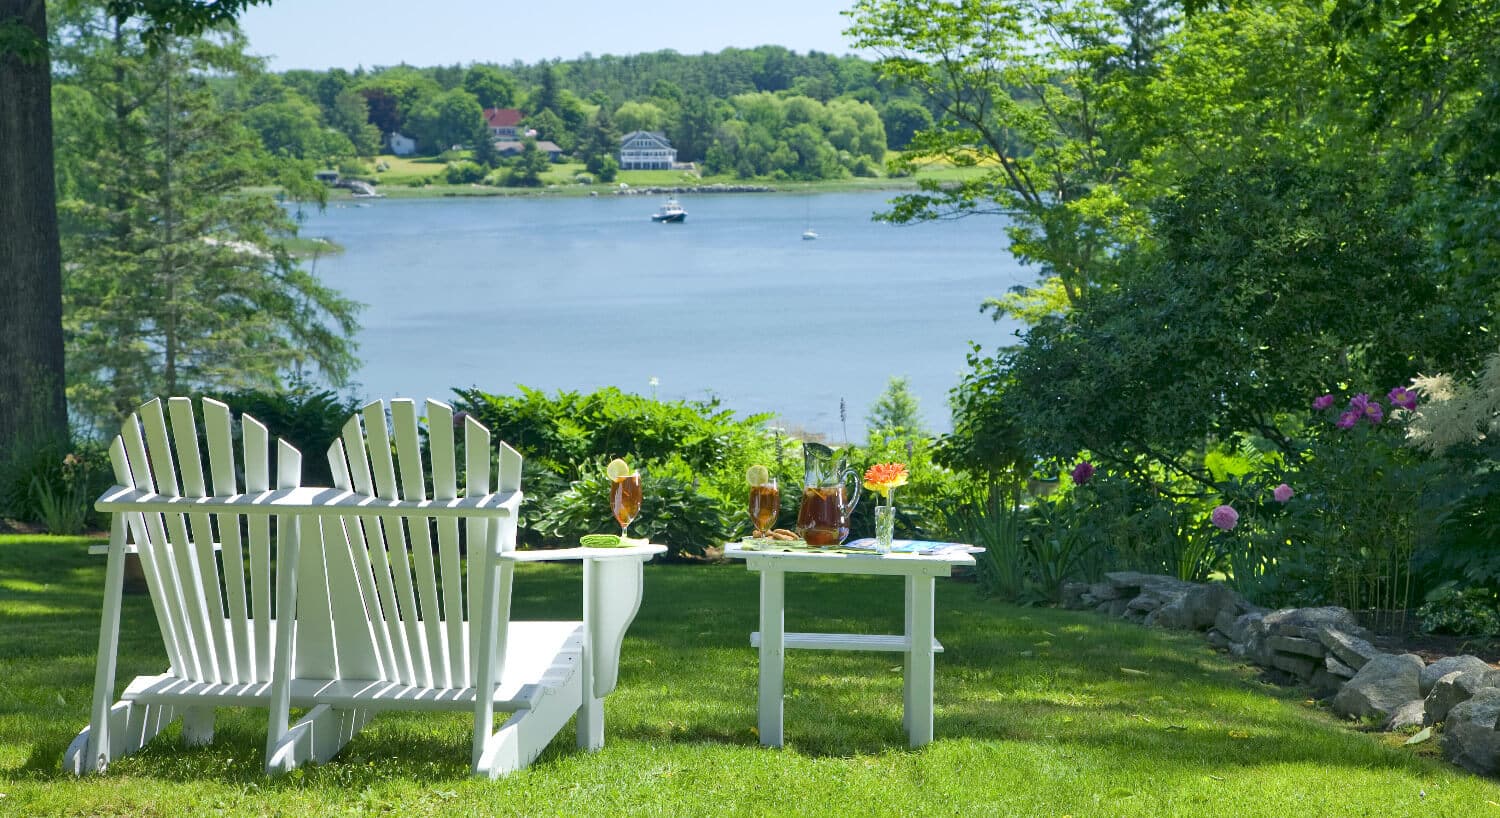 Two white adirondack chairs next to a small table on the grass overlooking the water.